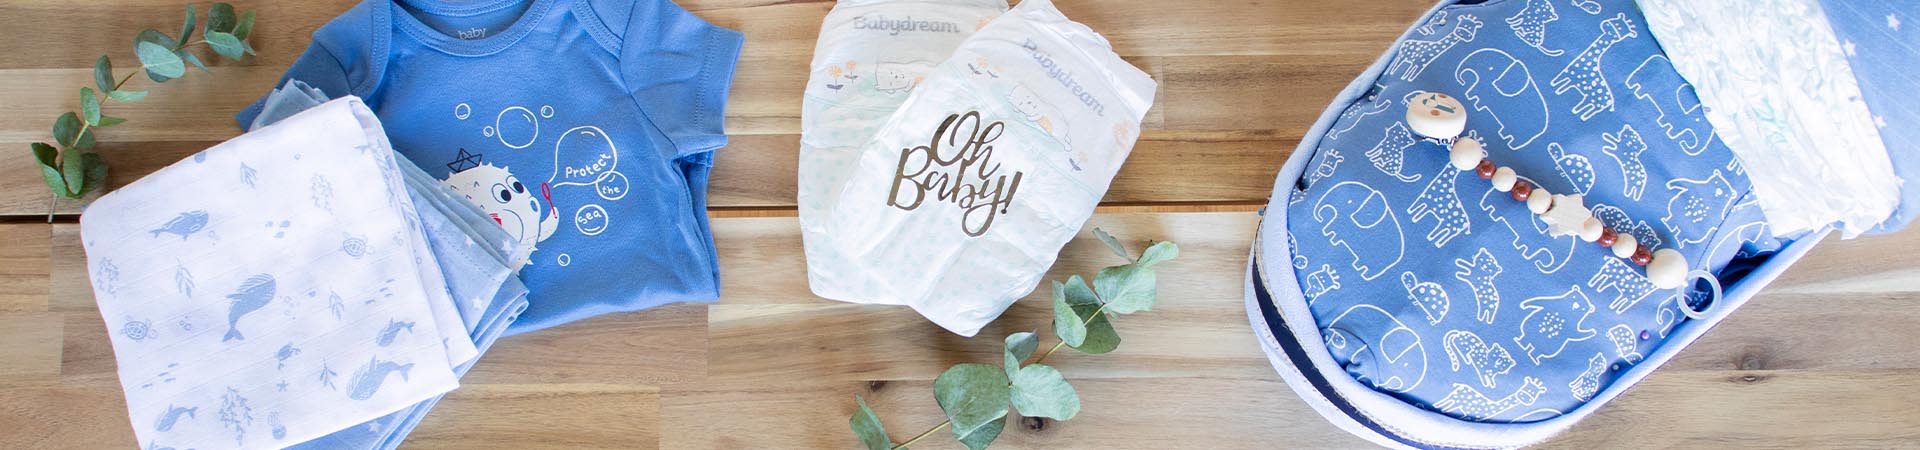 Pram nappy cake: craft instructions for a unique gift for newborn babies.